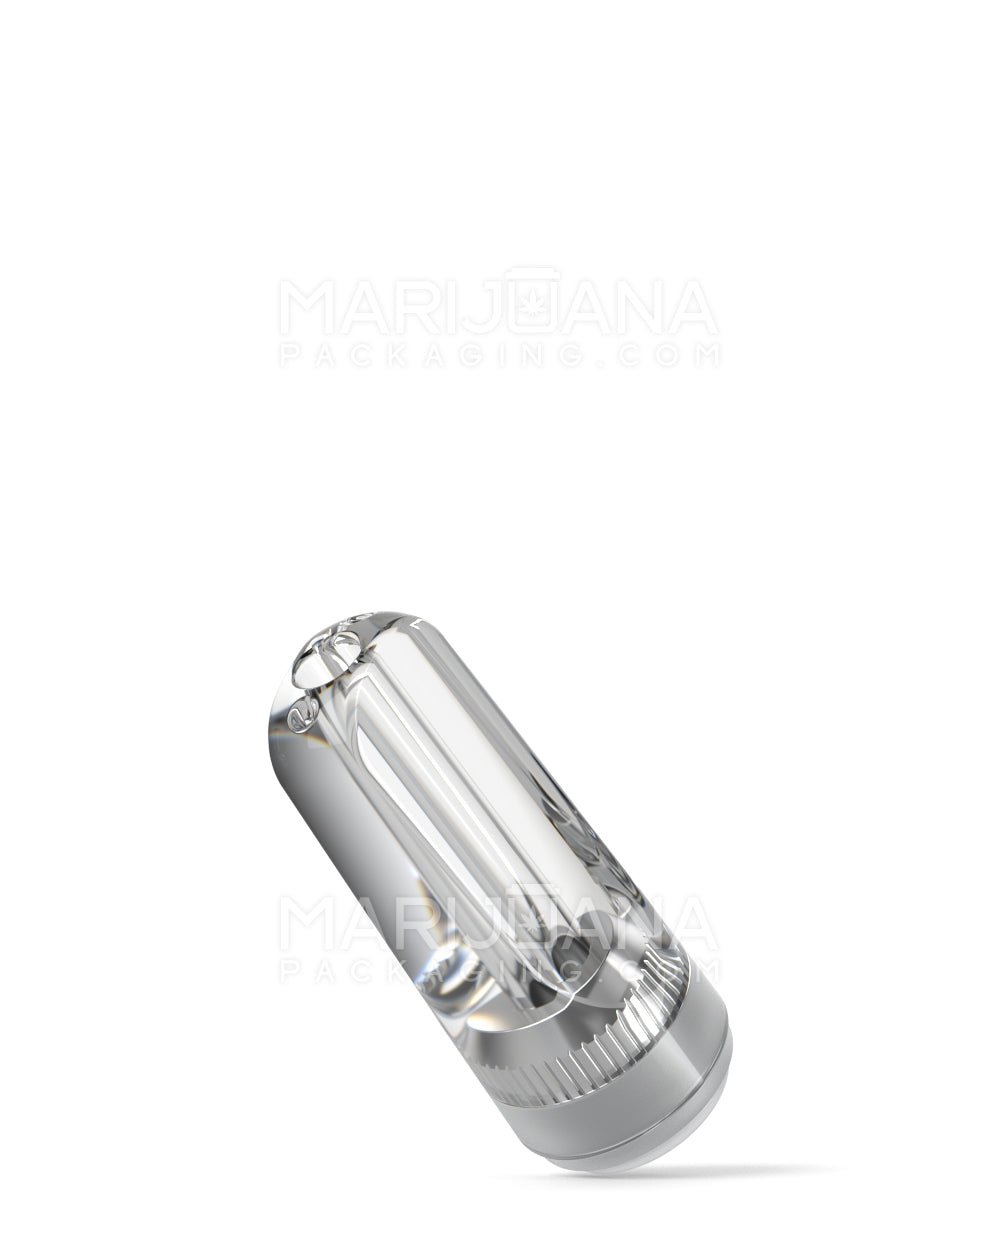 RAE | Flat Vape Mouthpiece for Screw On Plastic Cartridges | Clear Plastic - Screw On - 400 Count - 4